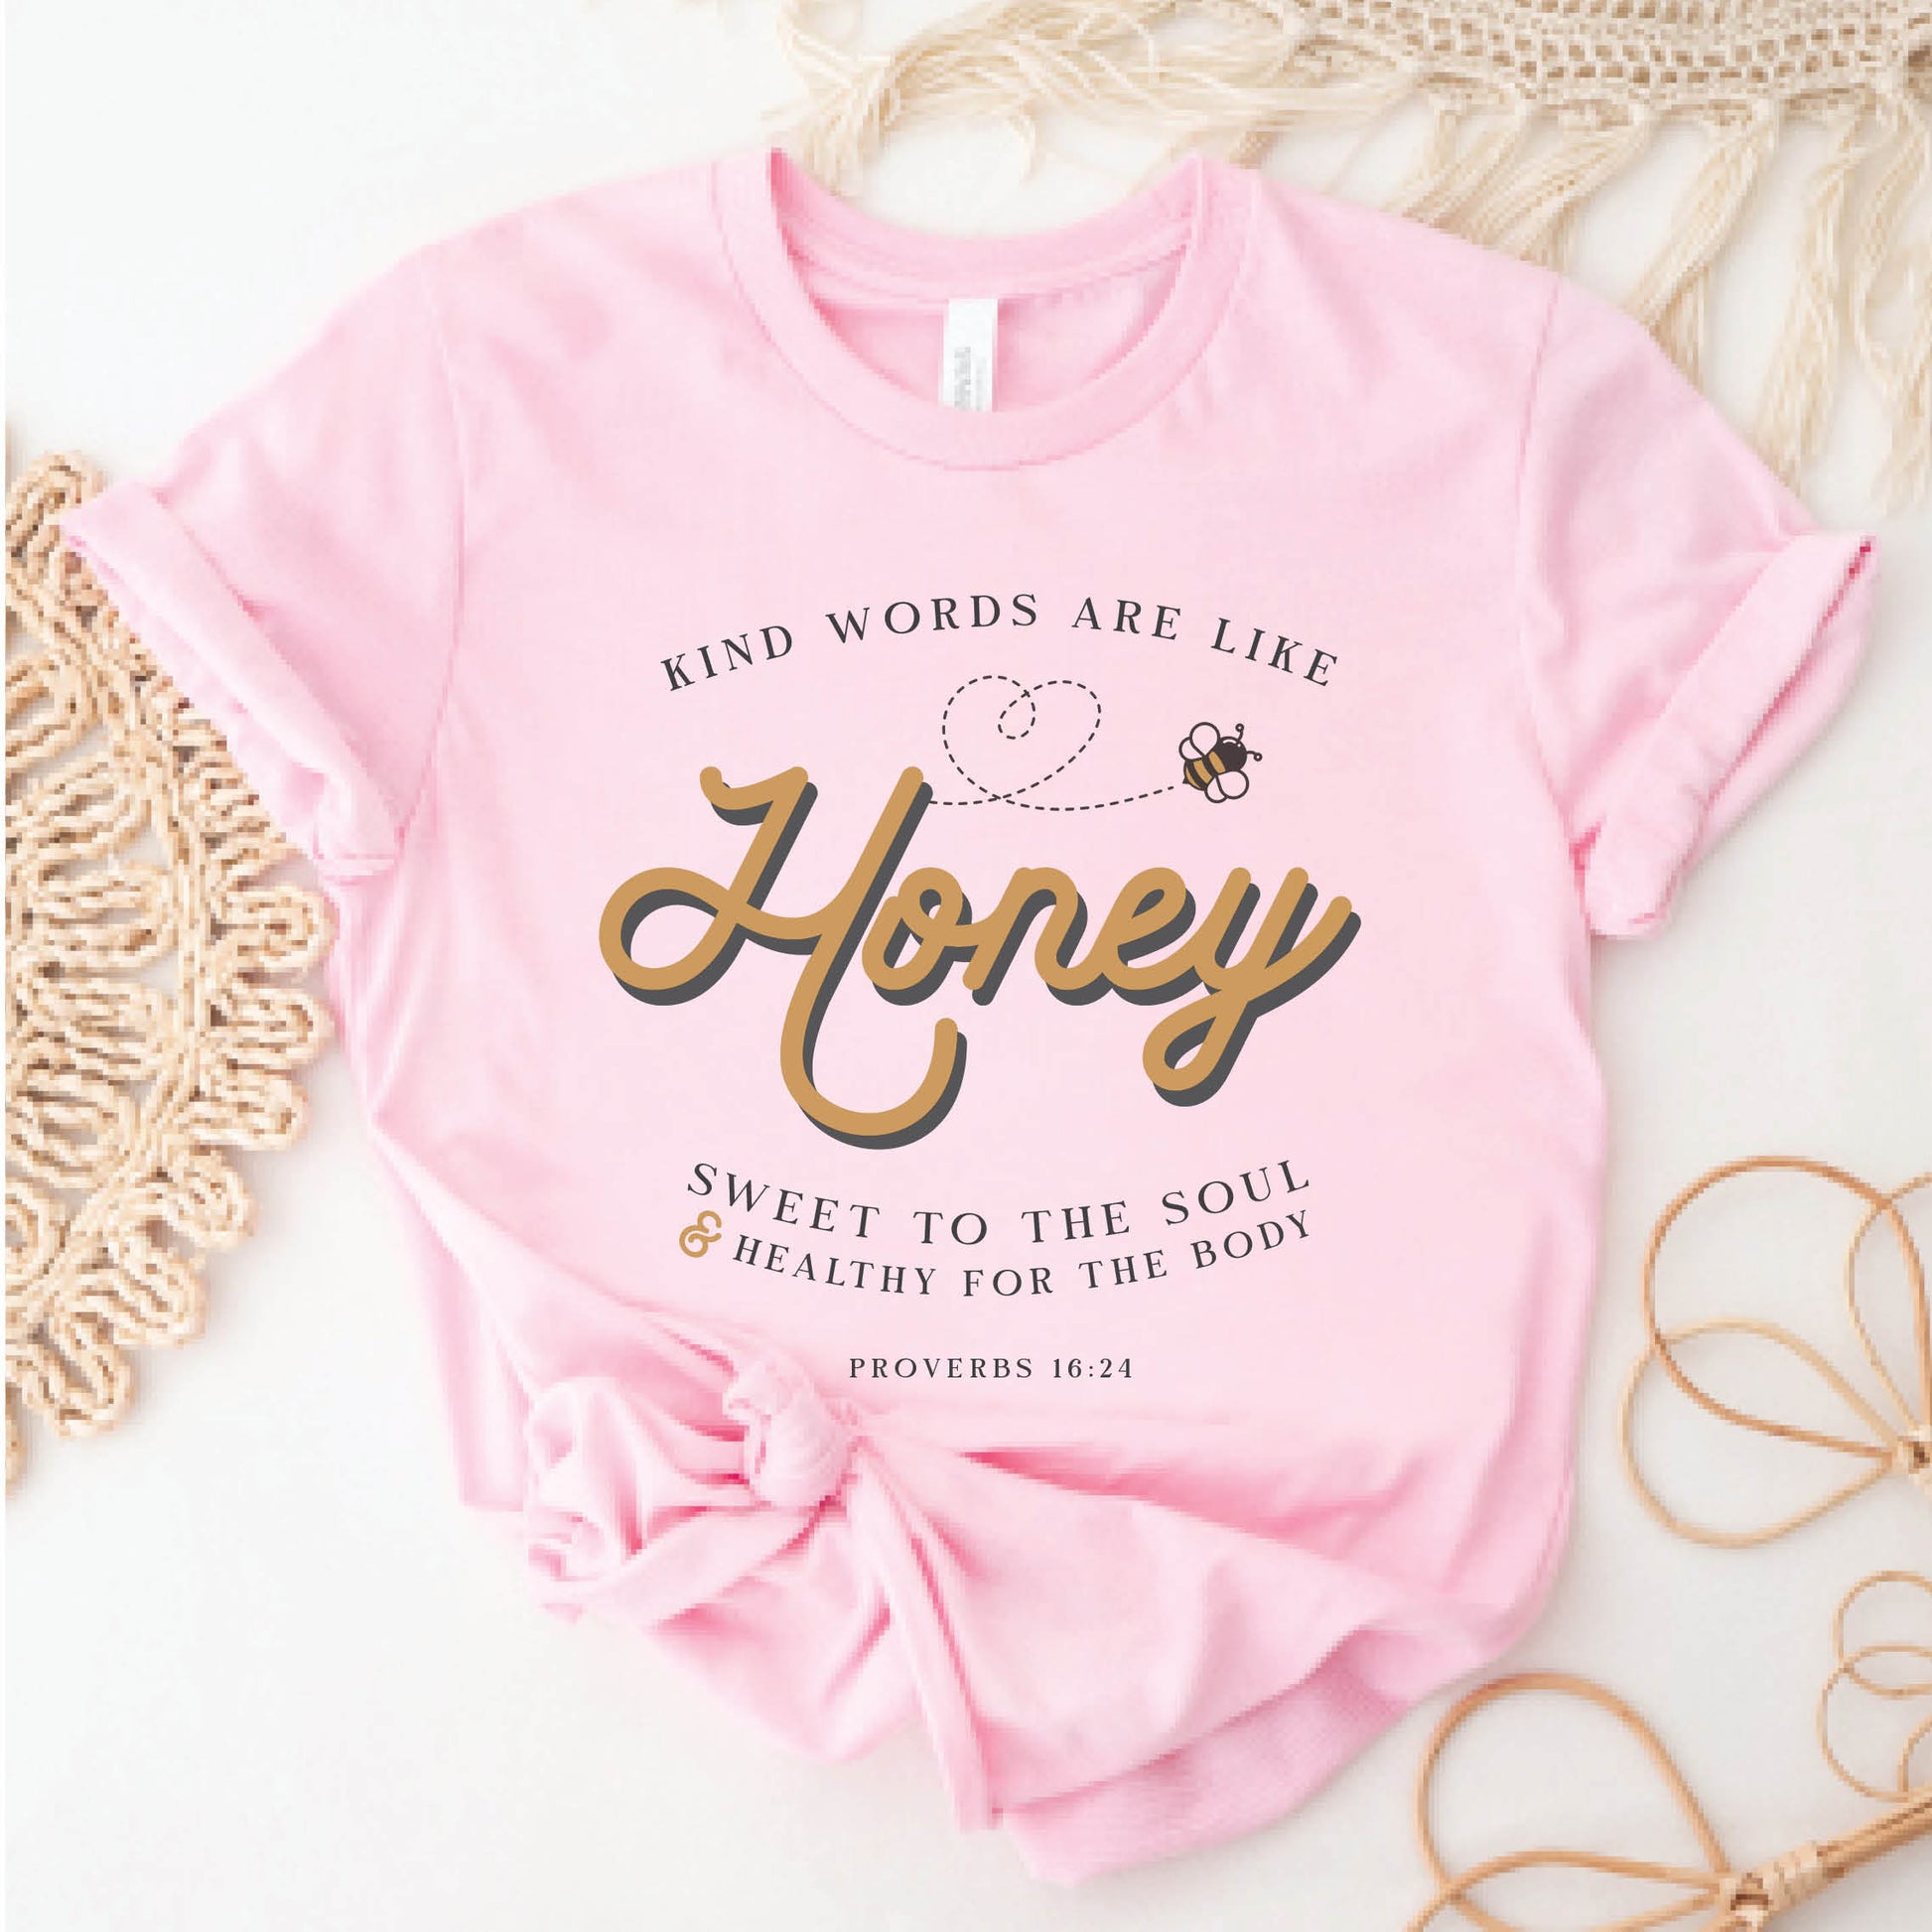 Pink & gold Christian aesthetic unisex faith-based kindness bee t-shirt for women with Proverbs 16:24 bible verse quote that says, "Kind Words Are Like Honey, Sweet To the Soul, and Healthy For the Body" 